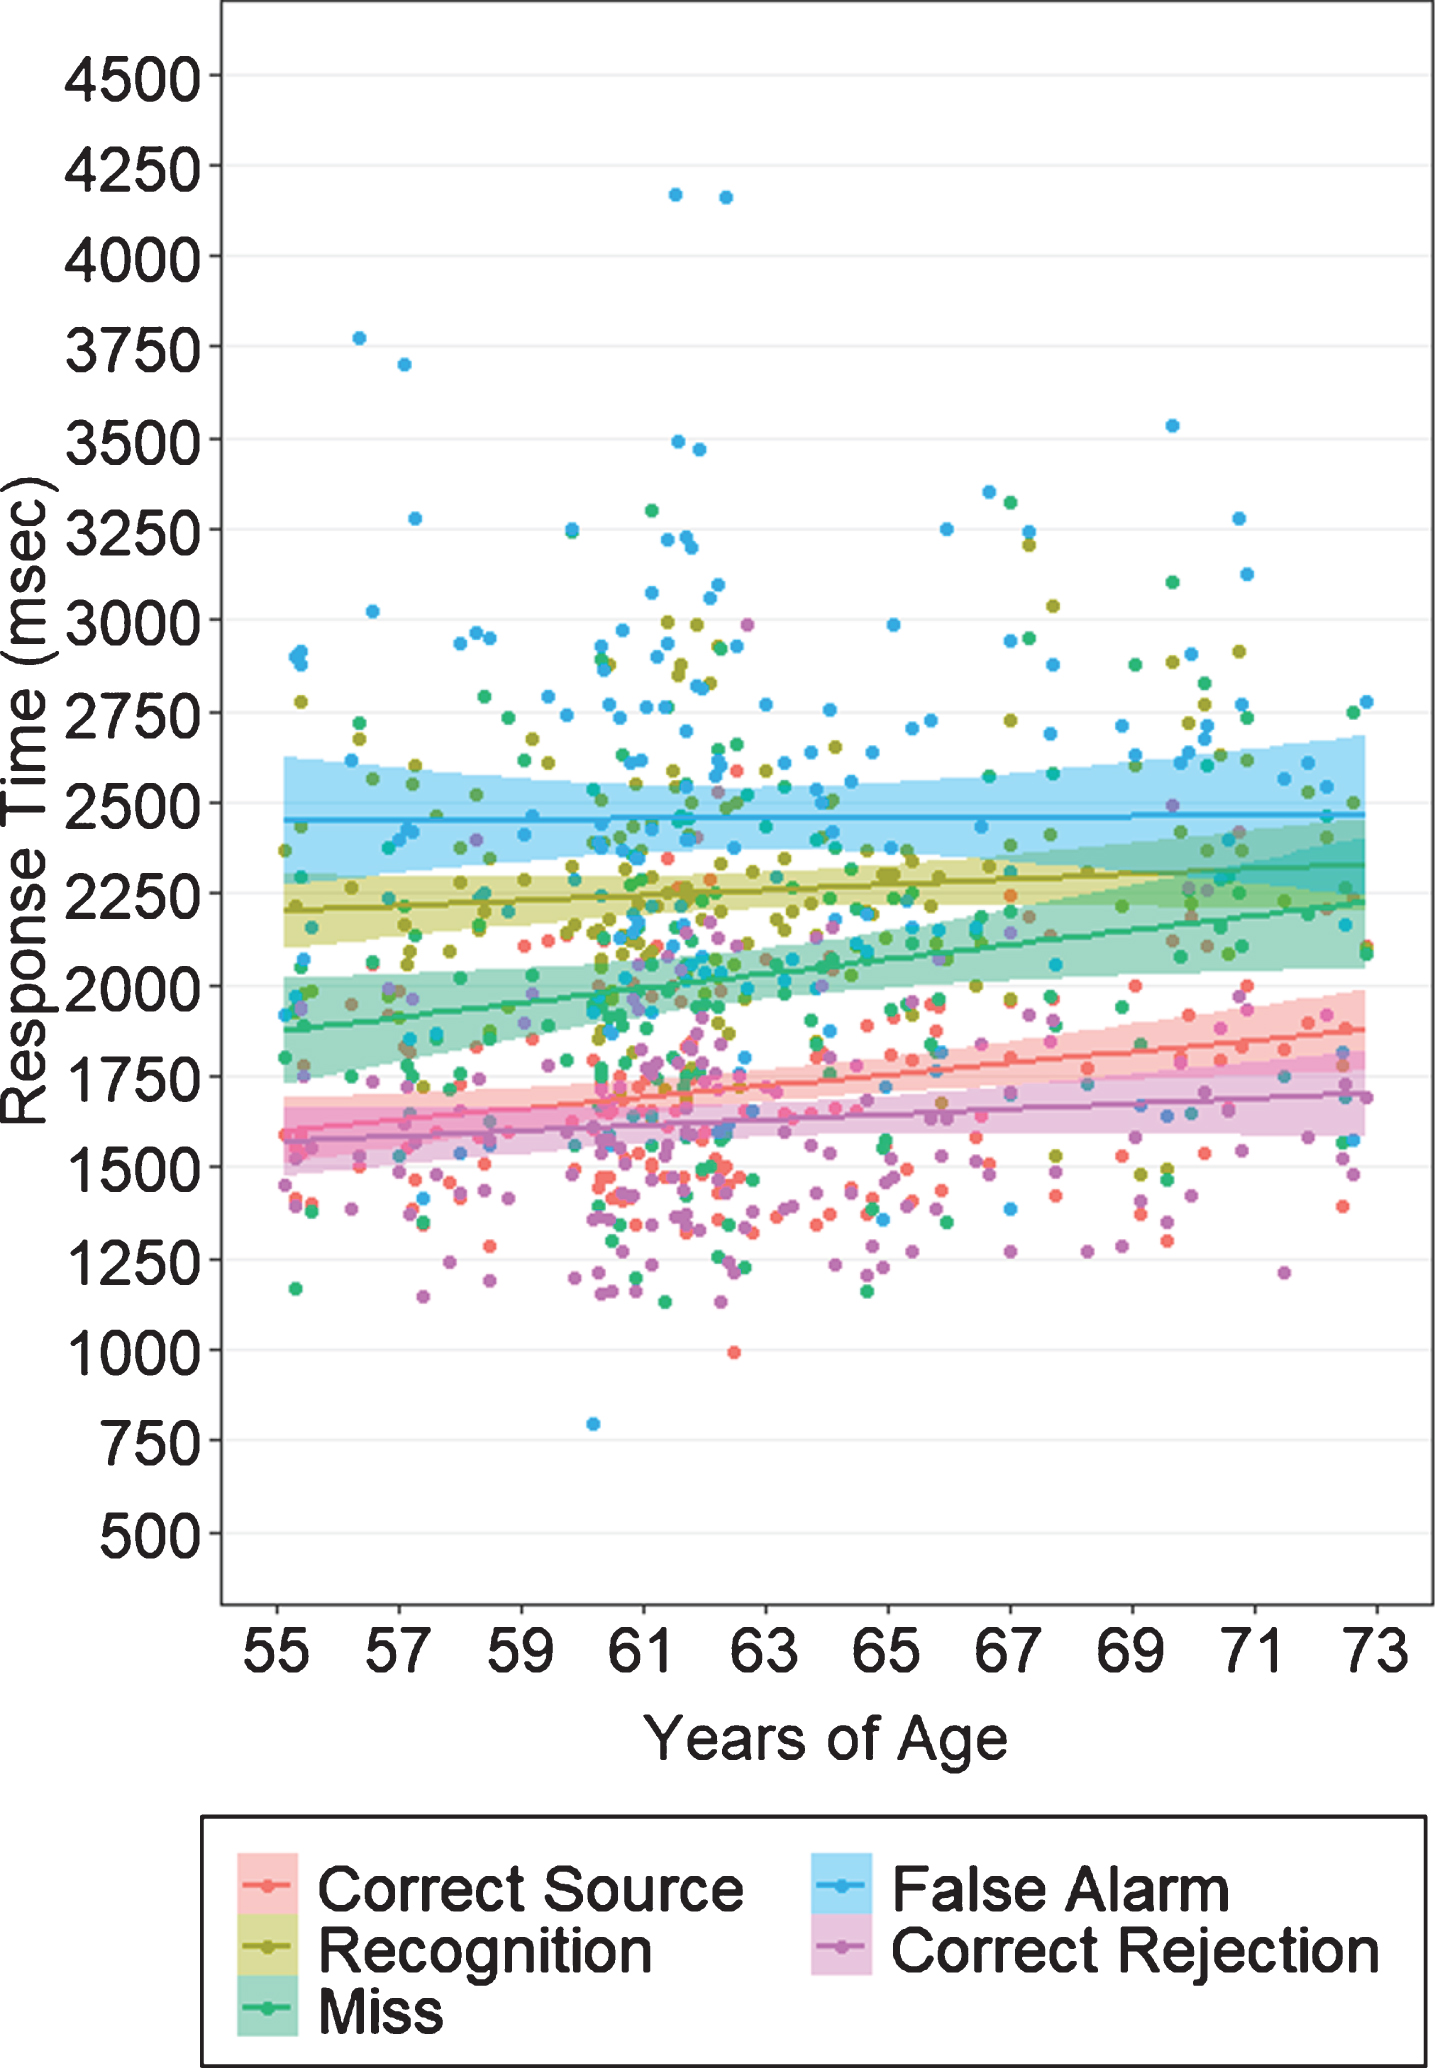 Response times on the episodic memory task by response category. On average, participants in all groups responded fastest for correct rejections, followed by correct object-location source associations, and slowest for object recognitions and false alarms. Shaded margins indicate 95% confidence intervals.